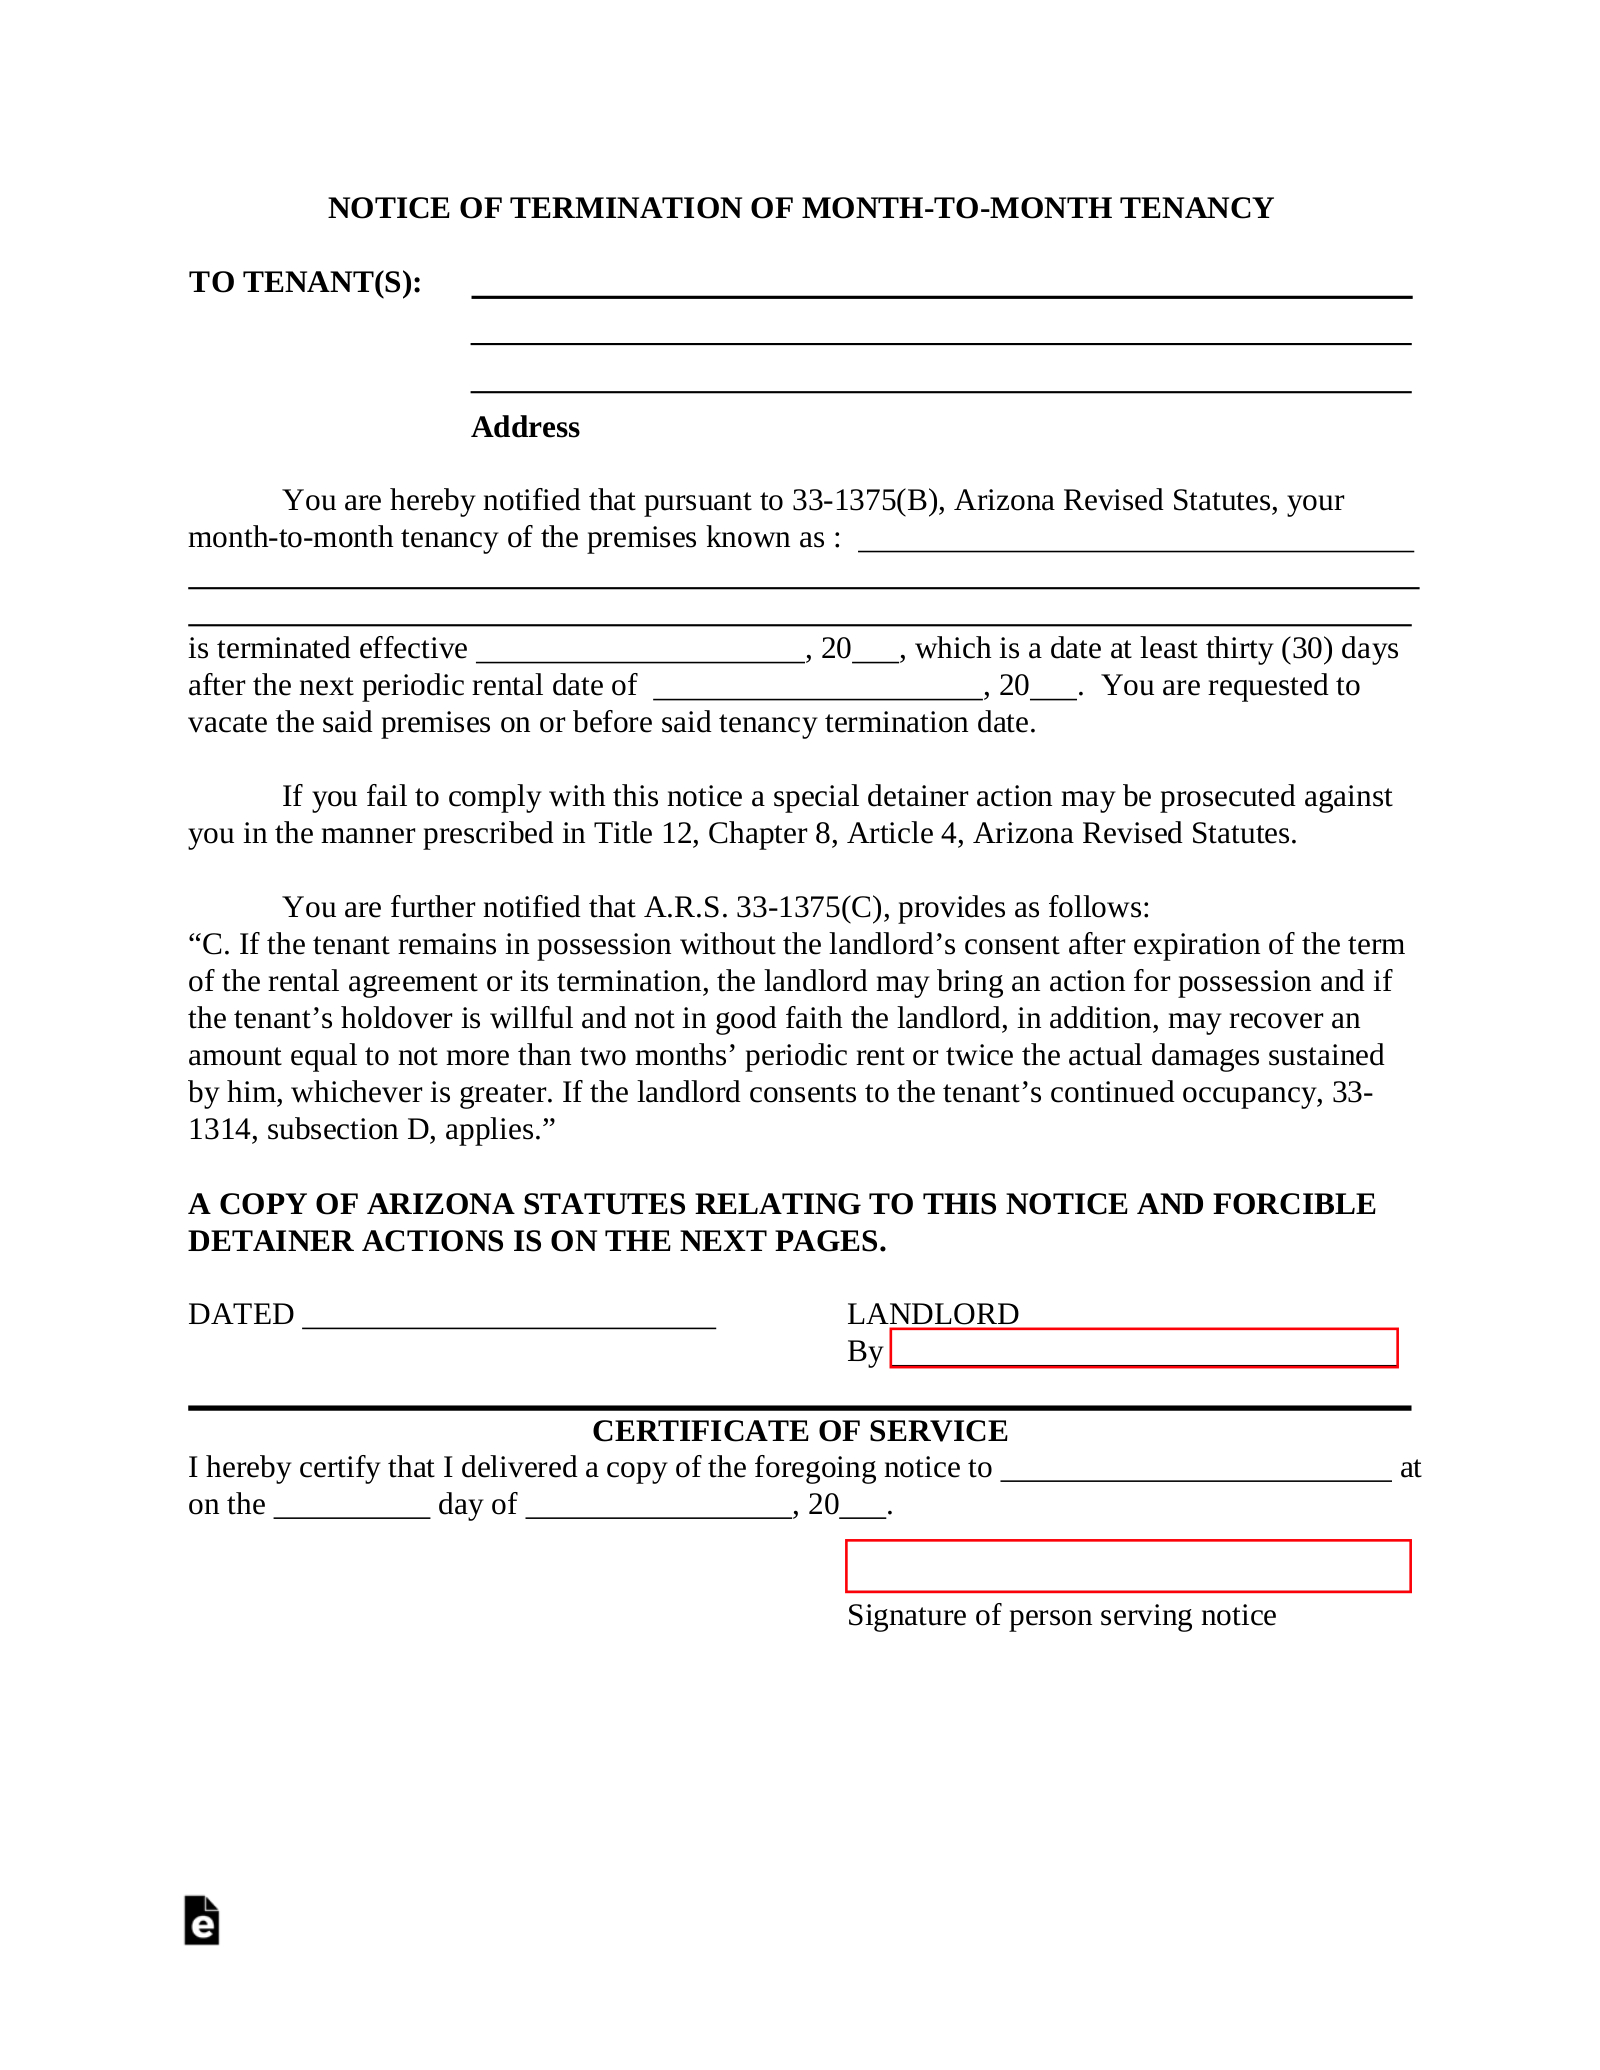 Arizona Lease Termination Letter Template | 30-Day Notice - Eforms in Free 30 Day Notice Contract Termination Letter Template